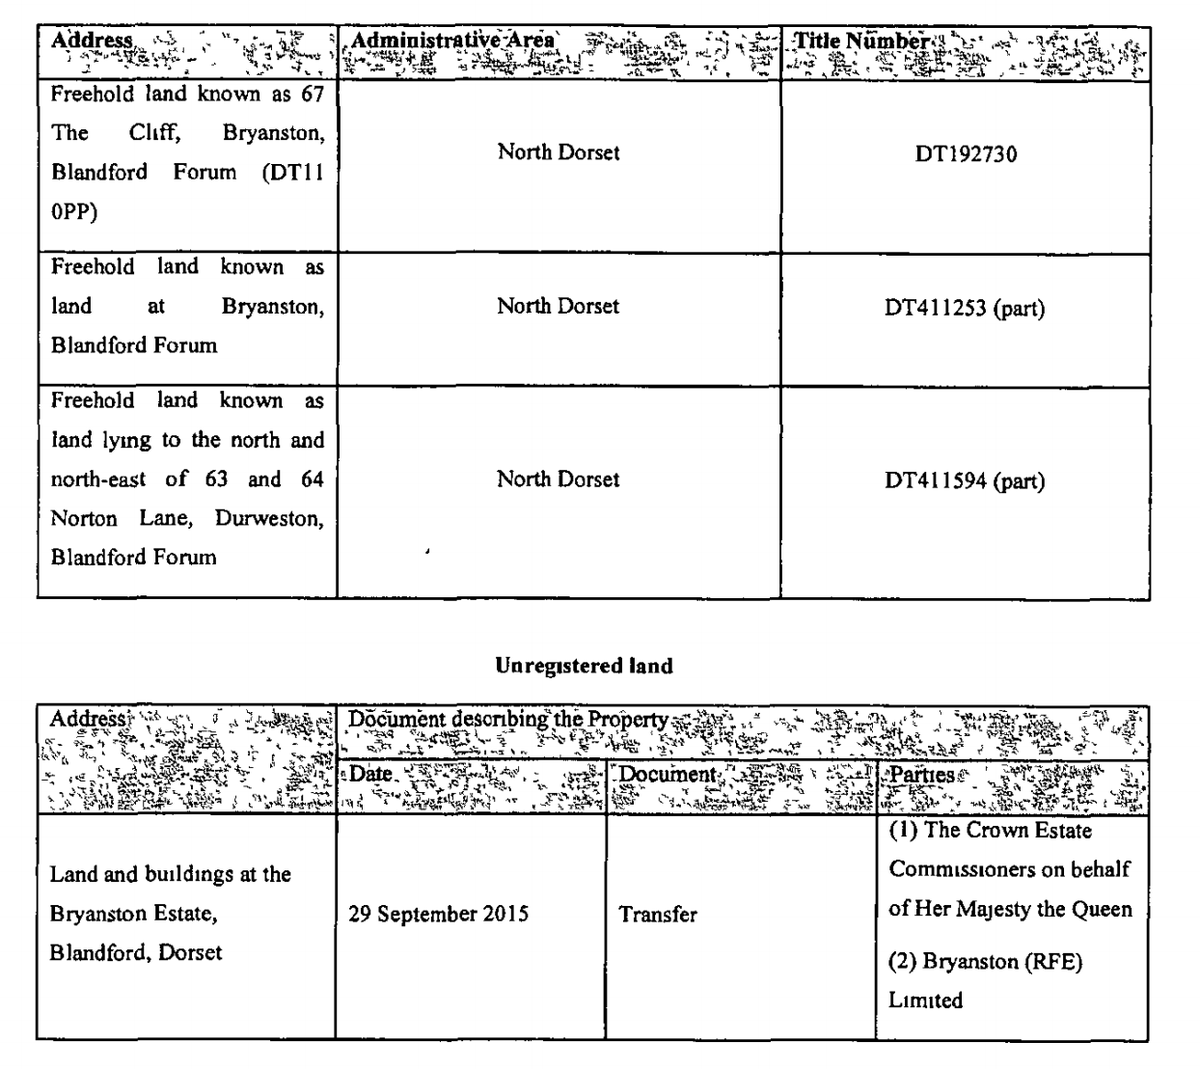 (8/?) Bryanston (RFE) Ltd's registered charge for acquiring the Bryanston Estate off the Crown also shows, intriguingly, that it acquired some unregistered land. I've not seen this before; usually, any land that changes hands should become registered.